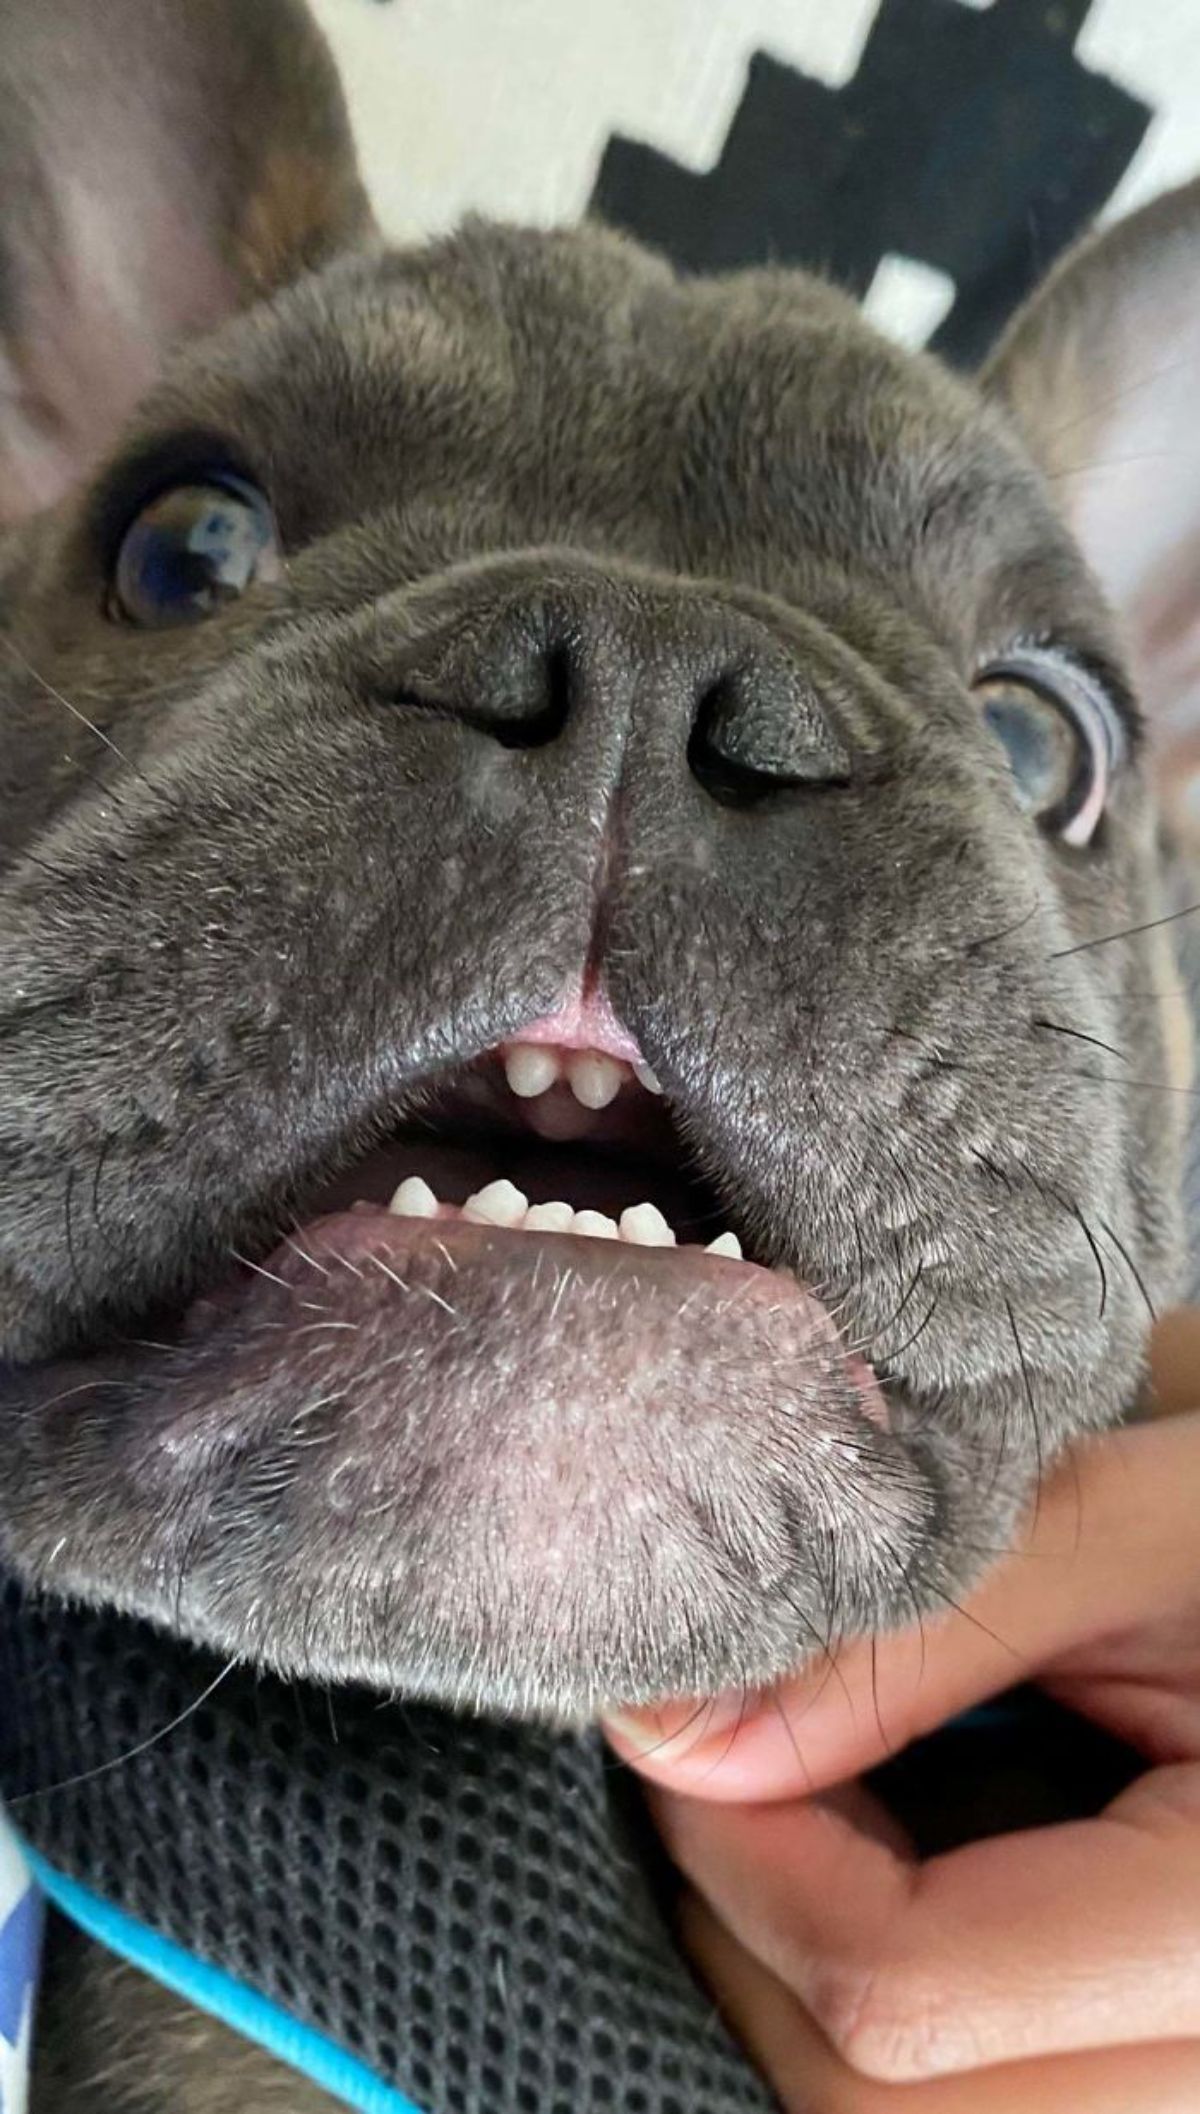 close up of grey dog's face with some teeth showing